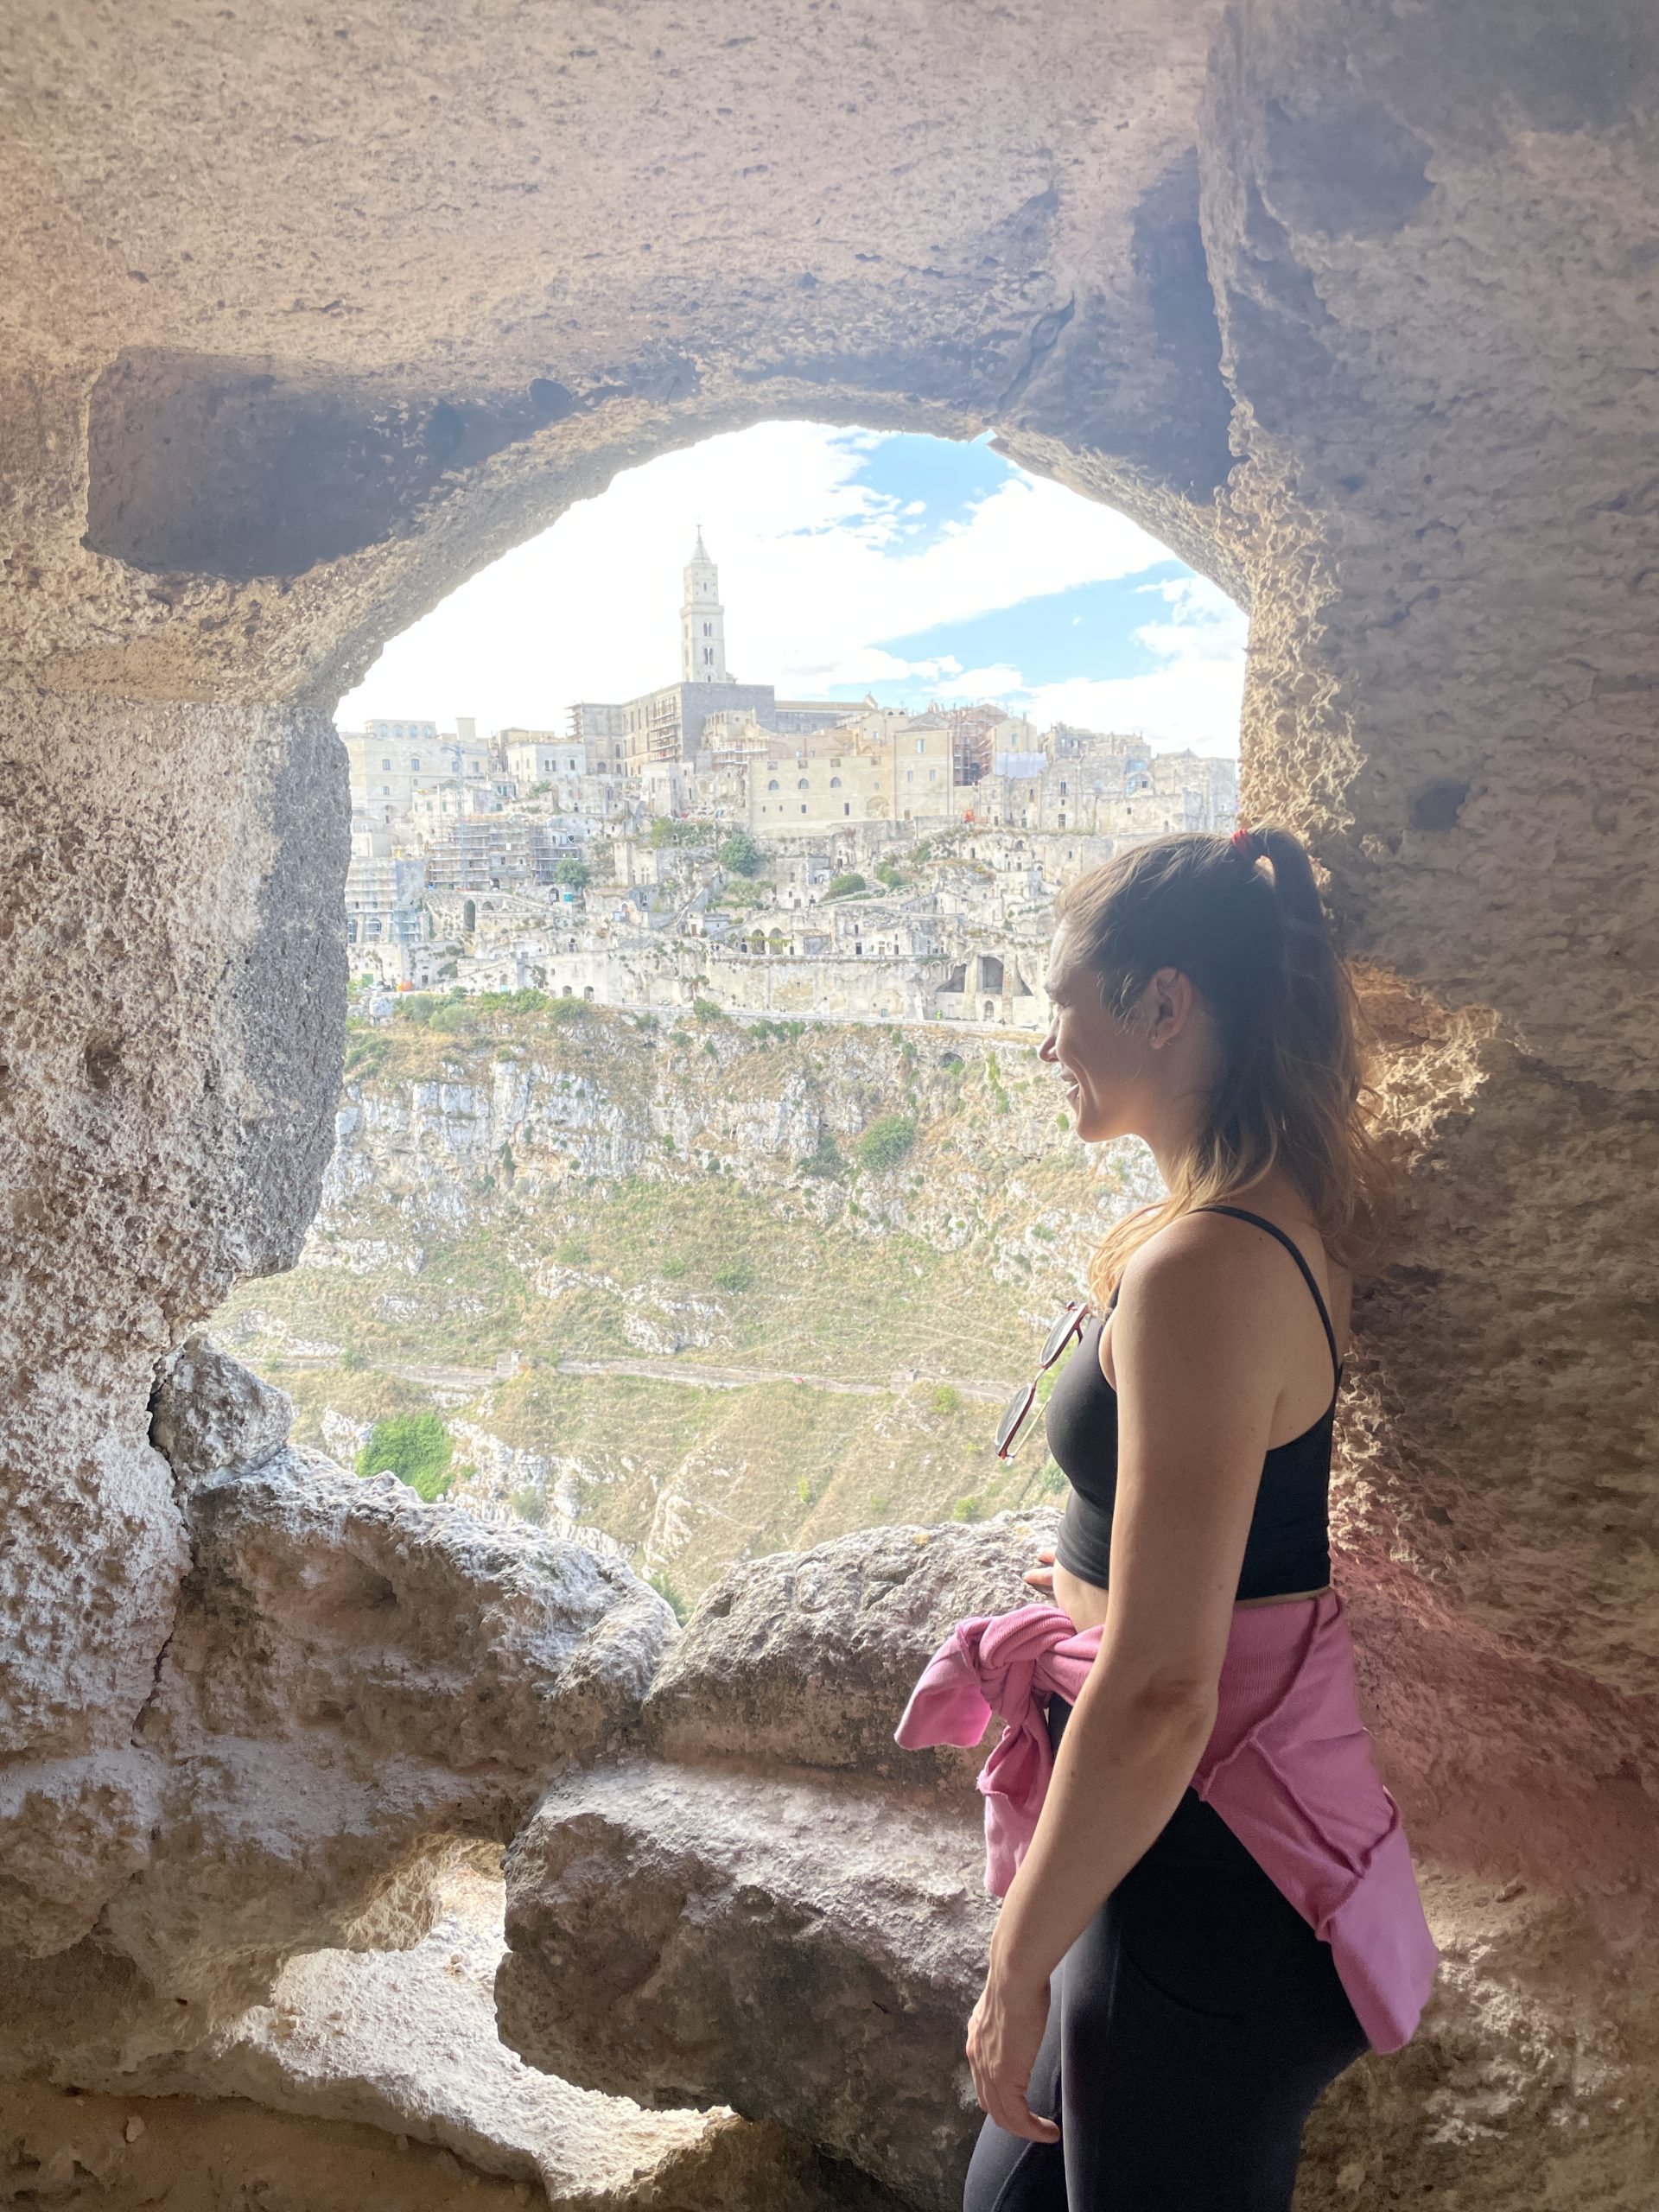 me looking out over Matera thinking about 10 years in italy